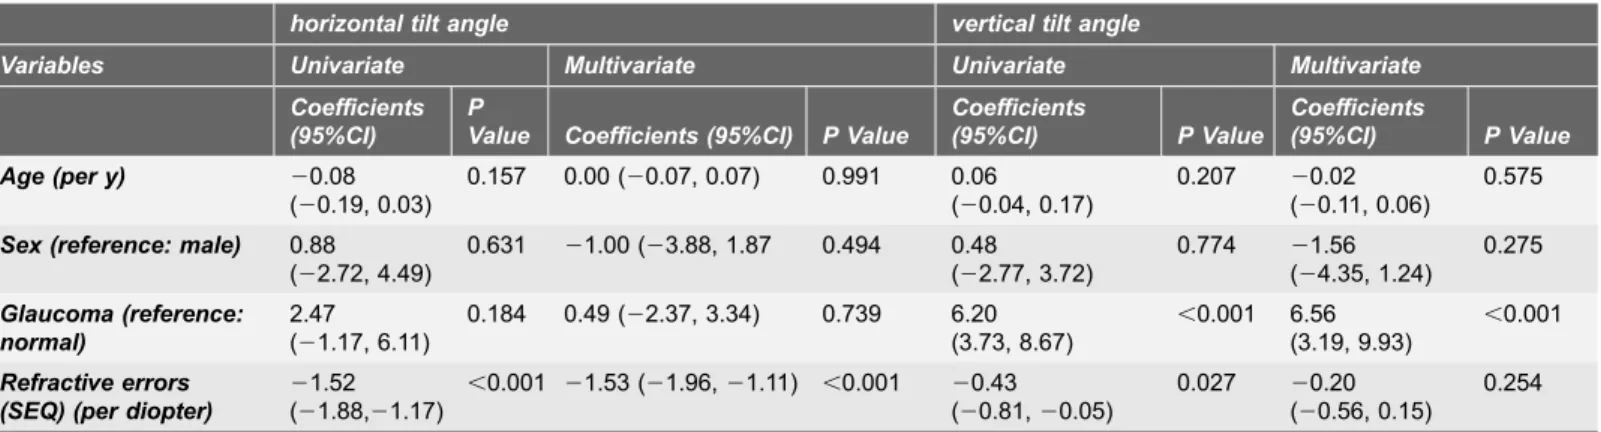 Table 3. Association of Potential Clinical and Biometric Parameters With the Lamina Tilt Angle Based on Univariate and Multivariate Analyses in 53 Eyes From 31 Control Subjects and Glaucoma Patints.